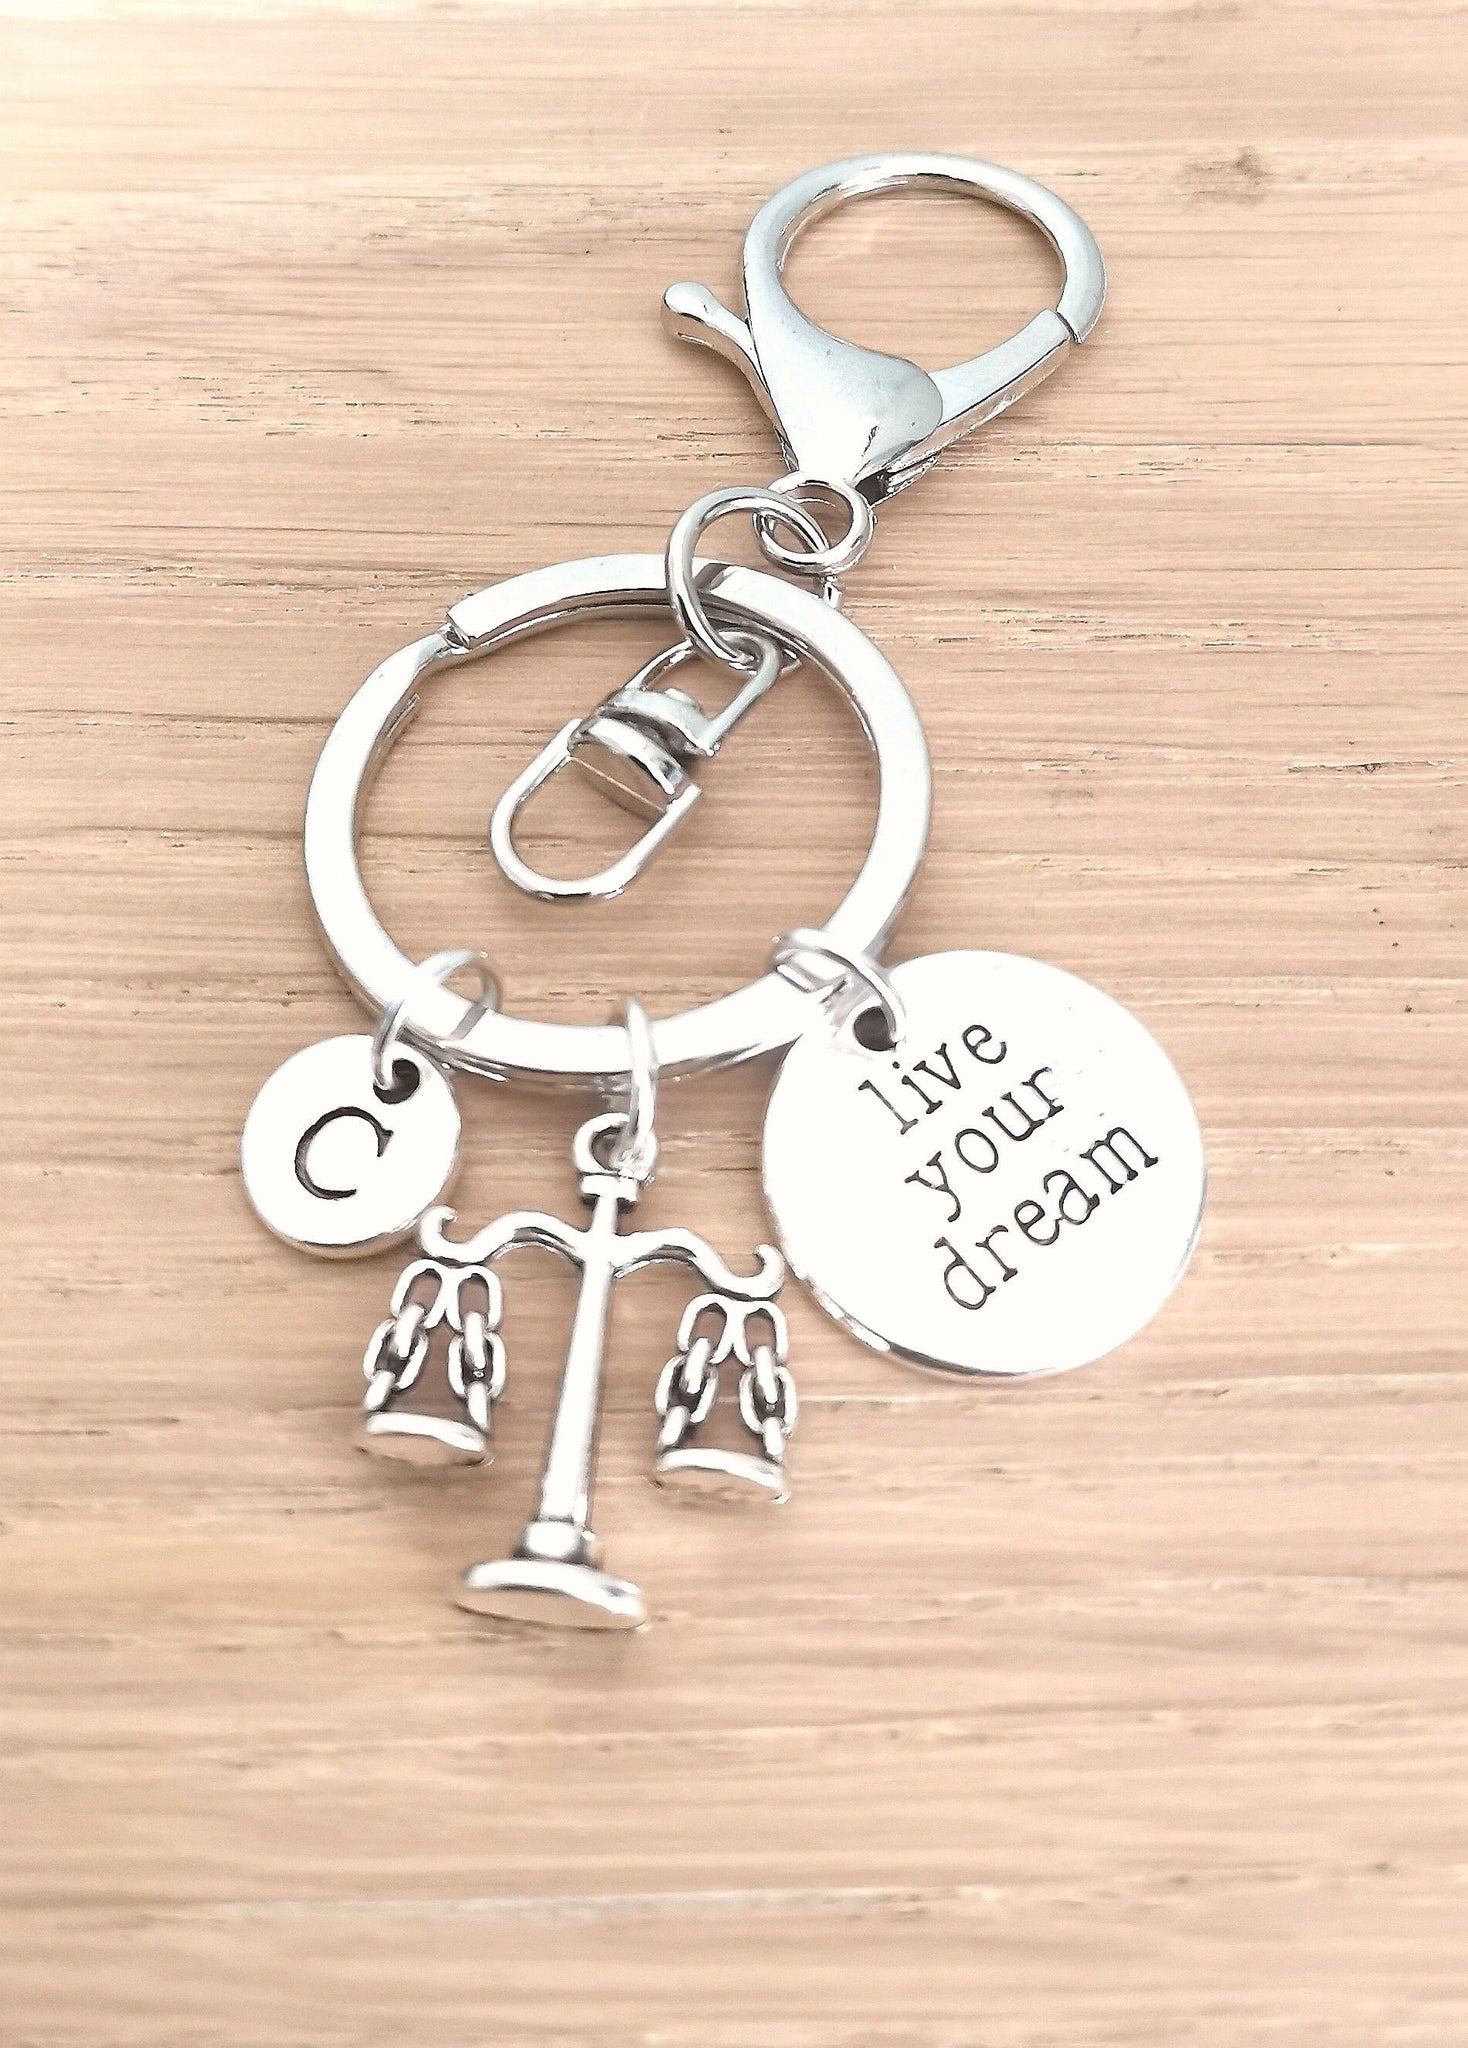 Law Student Gift, Lawyer Keyring, Lawyer Keyring, Scales of Justice Keyring, Law Graduate Gift, Libra , Lawyer Gift, Attorney, Legal, Lawyer